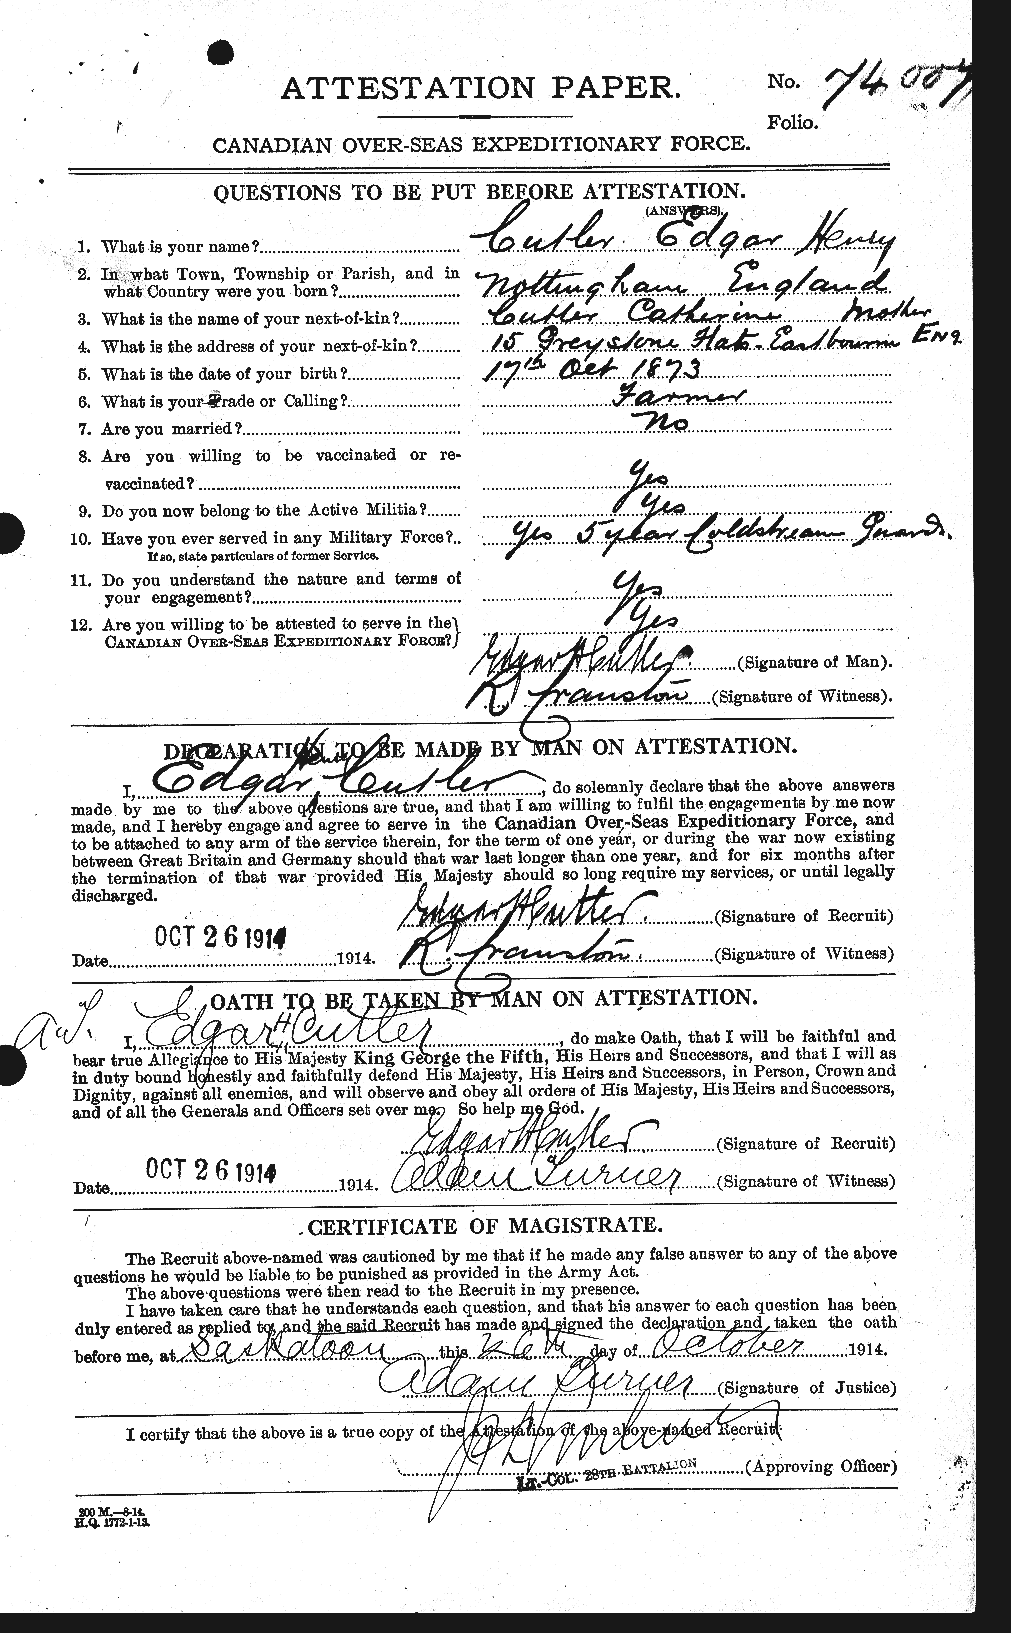 Personnel Records of the First World War - CEF 074401a